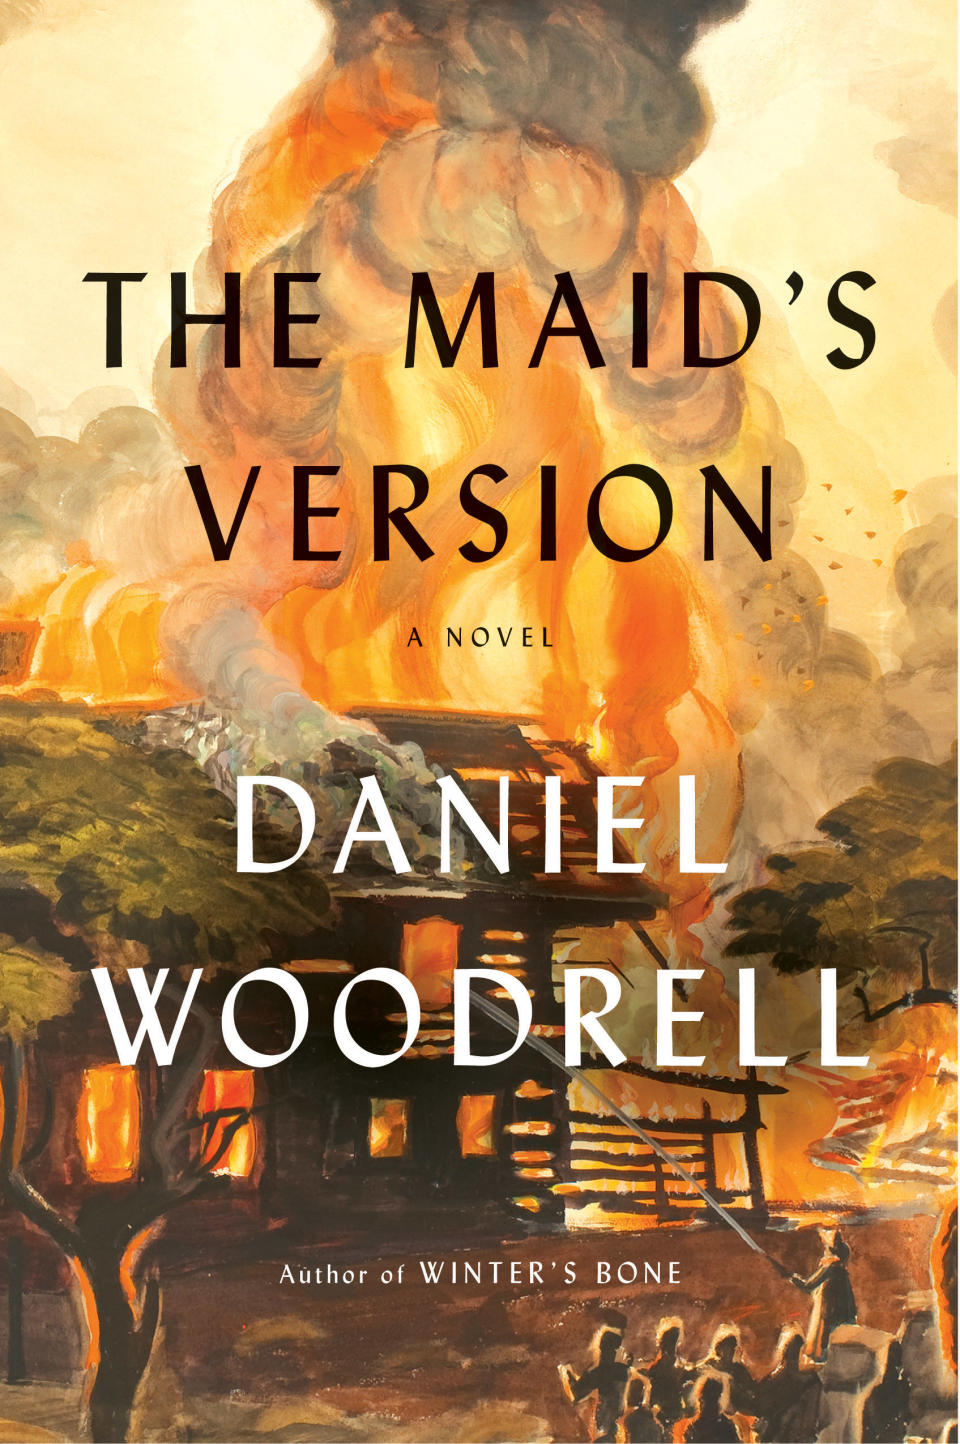 This book cover image released by Little, Brown and Company shows "The Maid's Version," by Daniel Woodrell. The book recounts the deaths of 42 people in an explosion at a dance in 1929 as told through the eyes of a young boy's grandmother, an angry, aging maid who's known little but poverty and disappointment. The book is based on real events that even today, nearly a century later, haunt the town. (AP Photo/Little, Brown and Company)